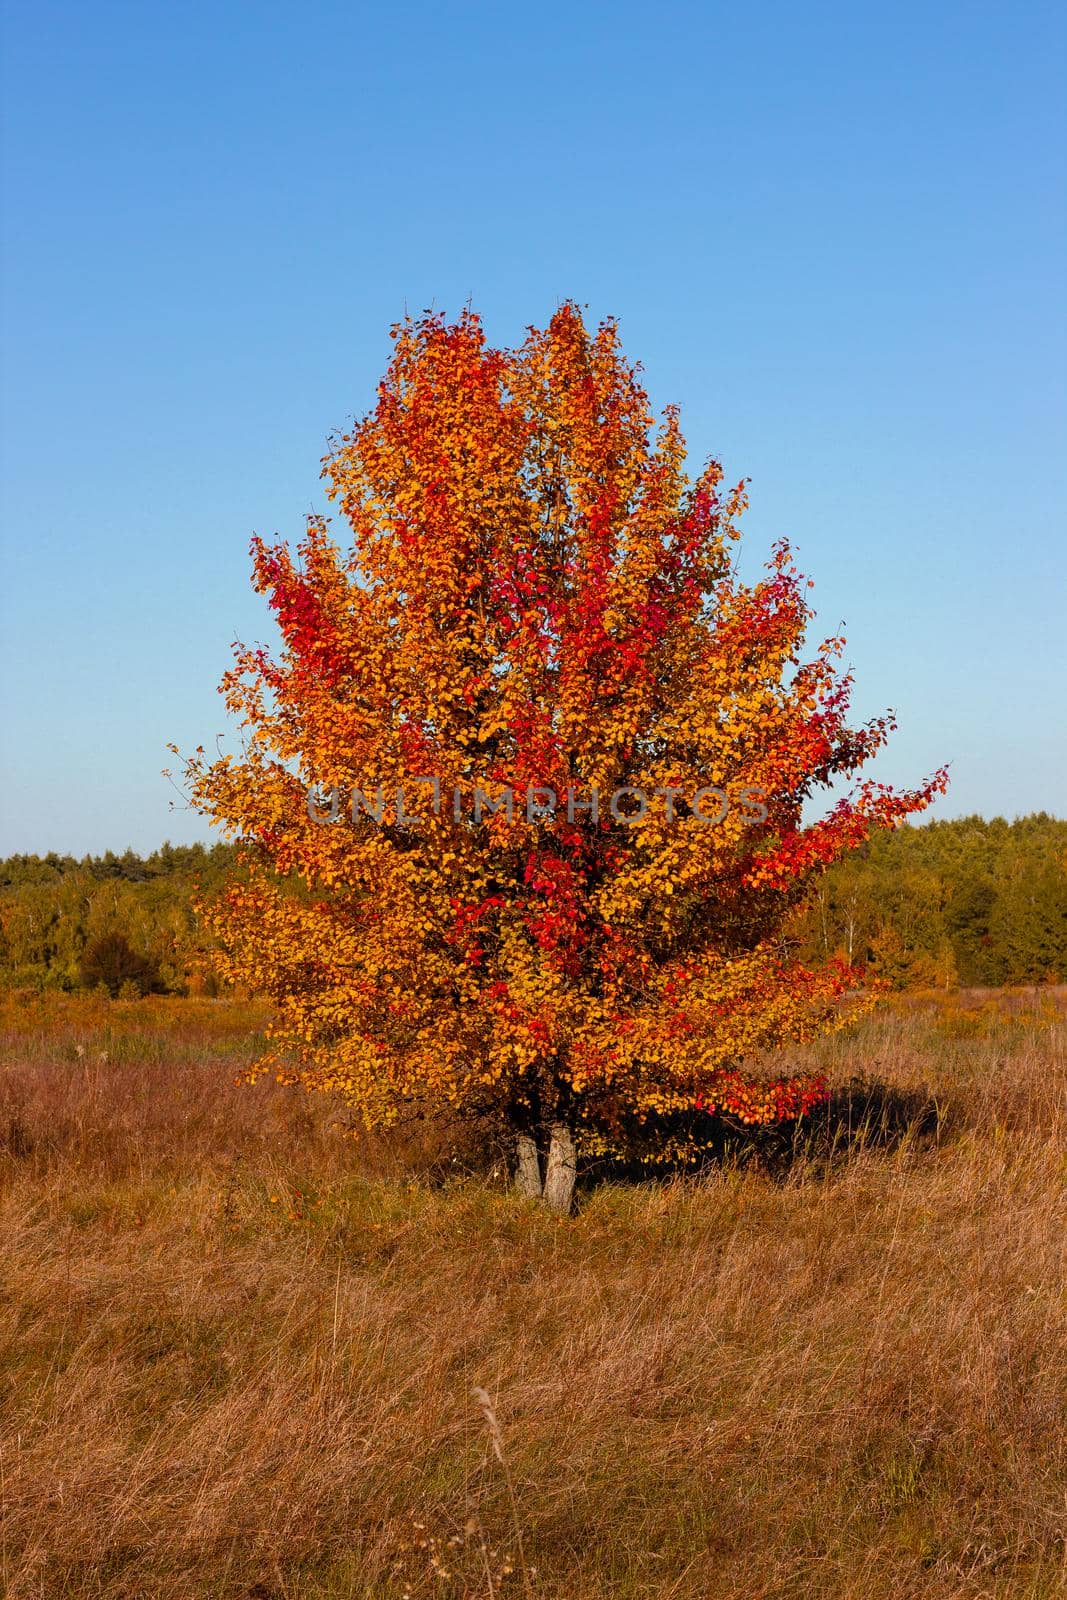 Autumn tree on a dry meadow. Against the background of the blue sky. High quality photo